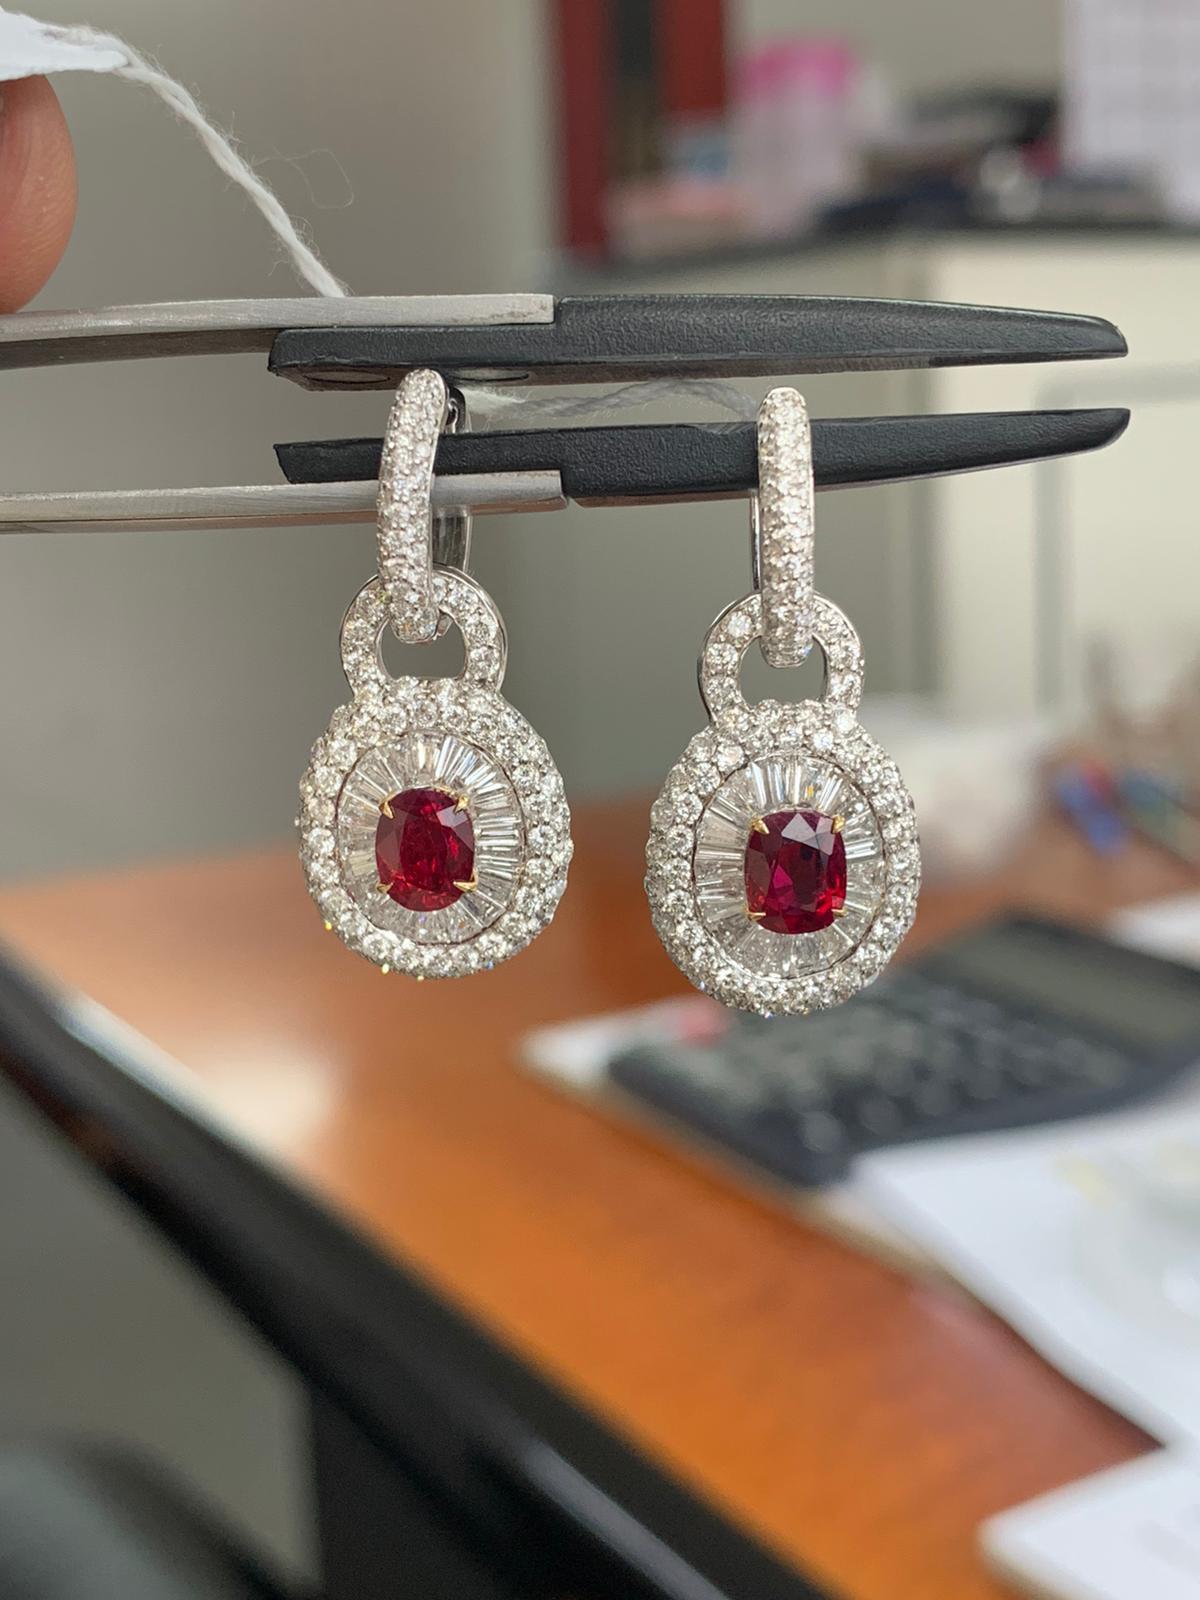 A brand new ruby and diamond earring by Rewa. The rubies weigh 1.22 and 1.14 carat each and they are both certified by Gem Research Swisslab (GRS) as natural, no heat, and 'Pigeon Blood'. The rubies are surrounded by 3.11 carat diamonds on 18k white